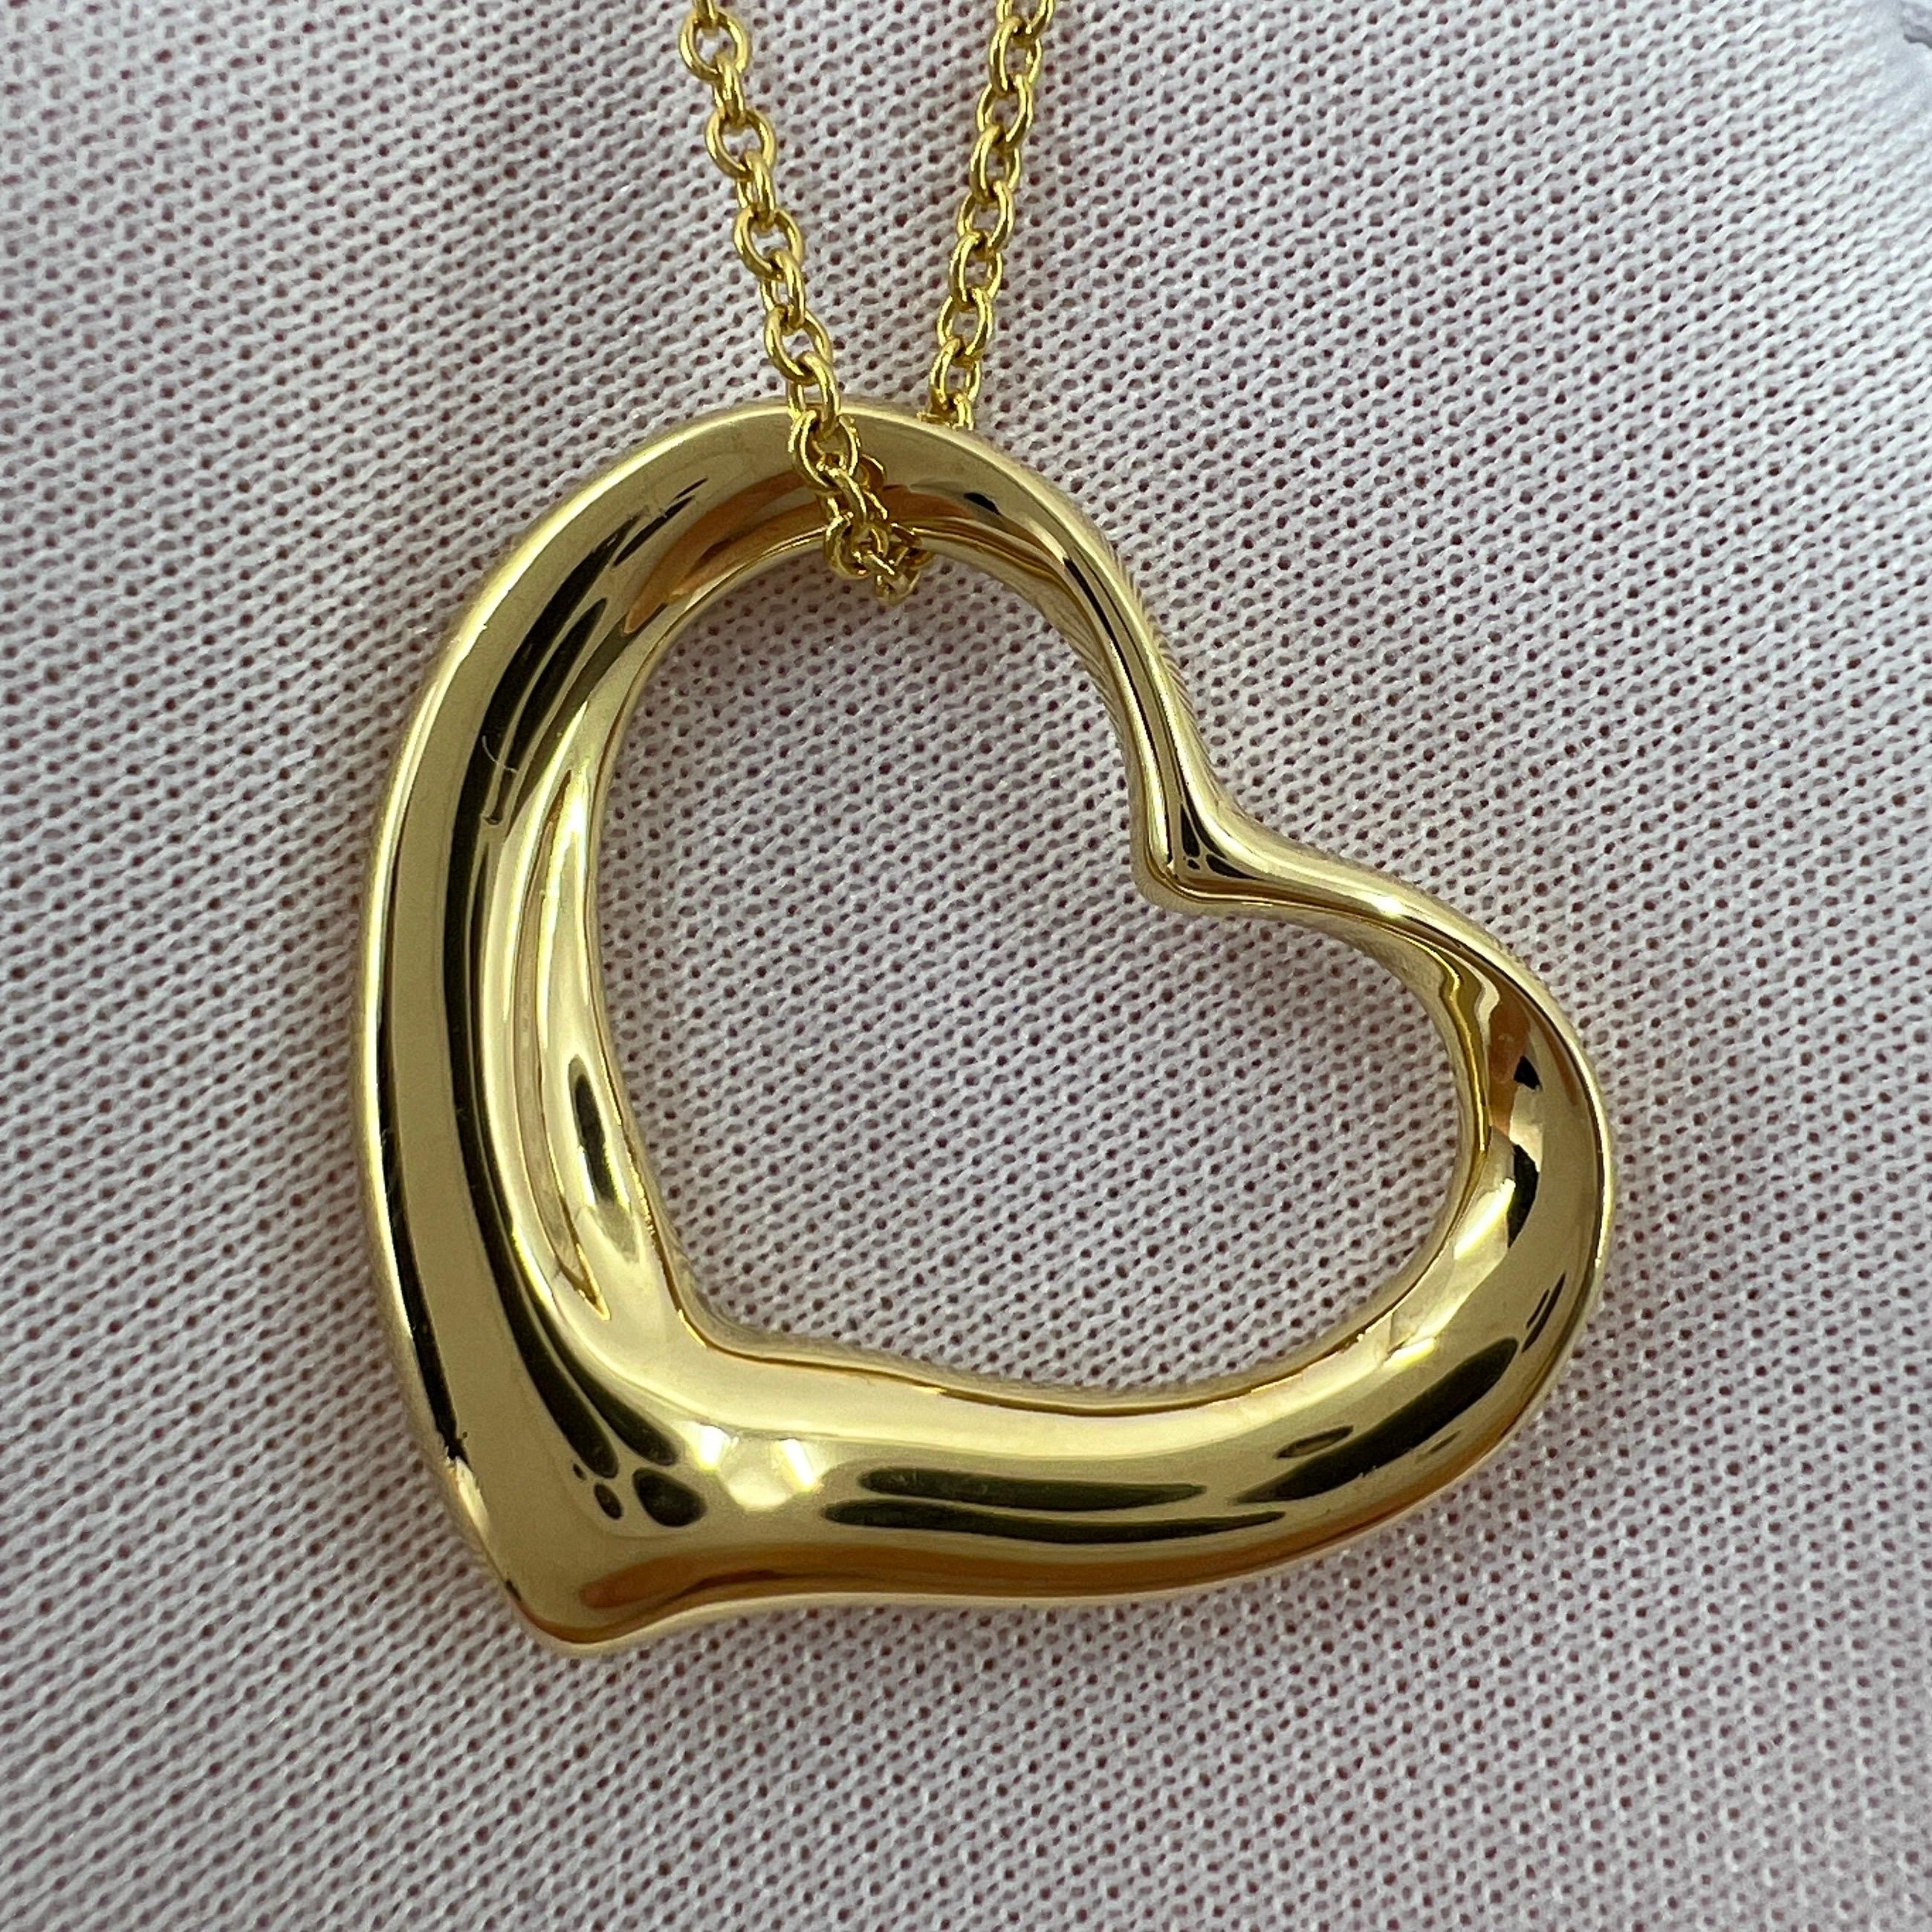 Tiffany & Co. Elsa Peretti Extra Large Open Heart 18k Gold Pendant Necklace In Excellent Condition For Sale In Birmingham, GB